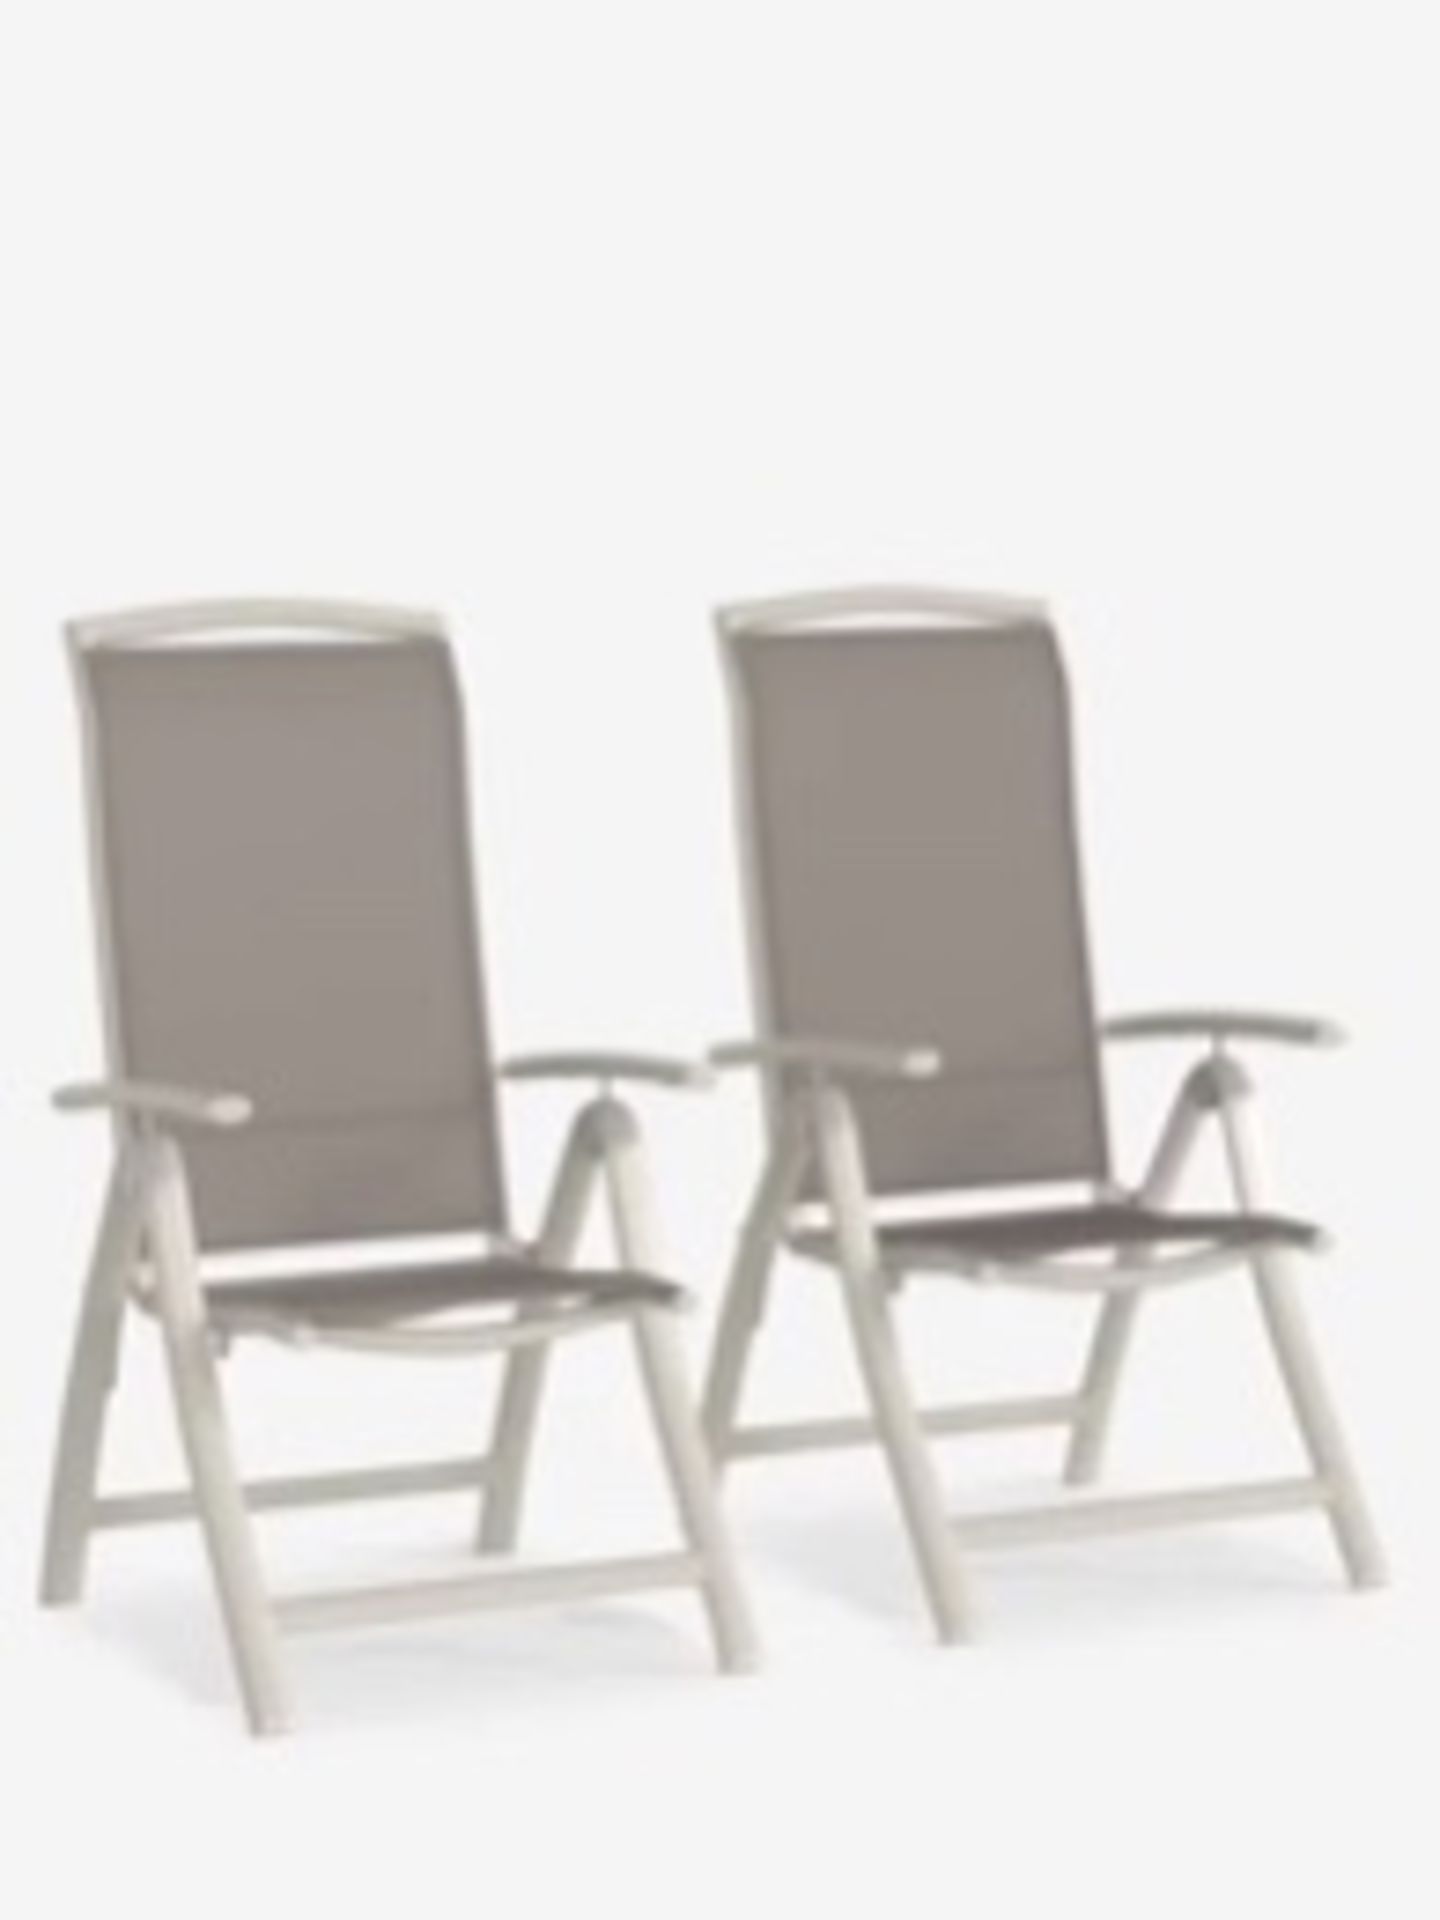 John Lewis Miami Garden Reclining Dining Chair, One Chair, Putty RRP £75